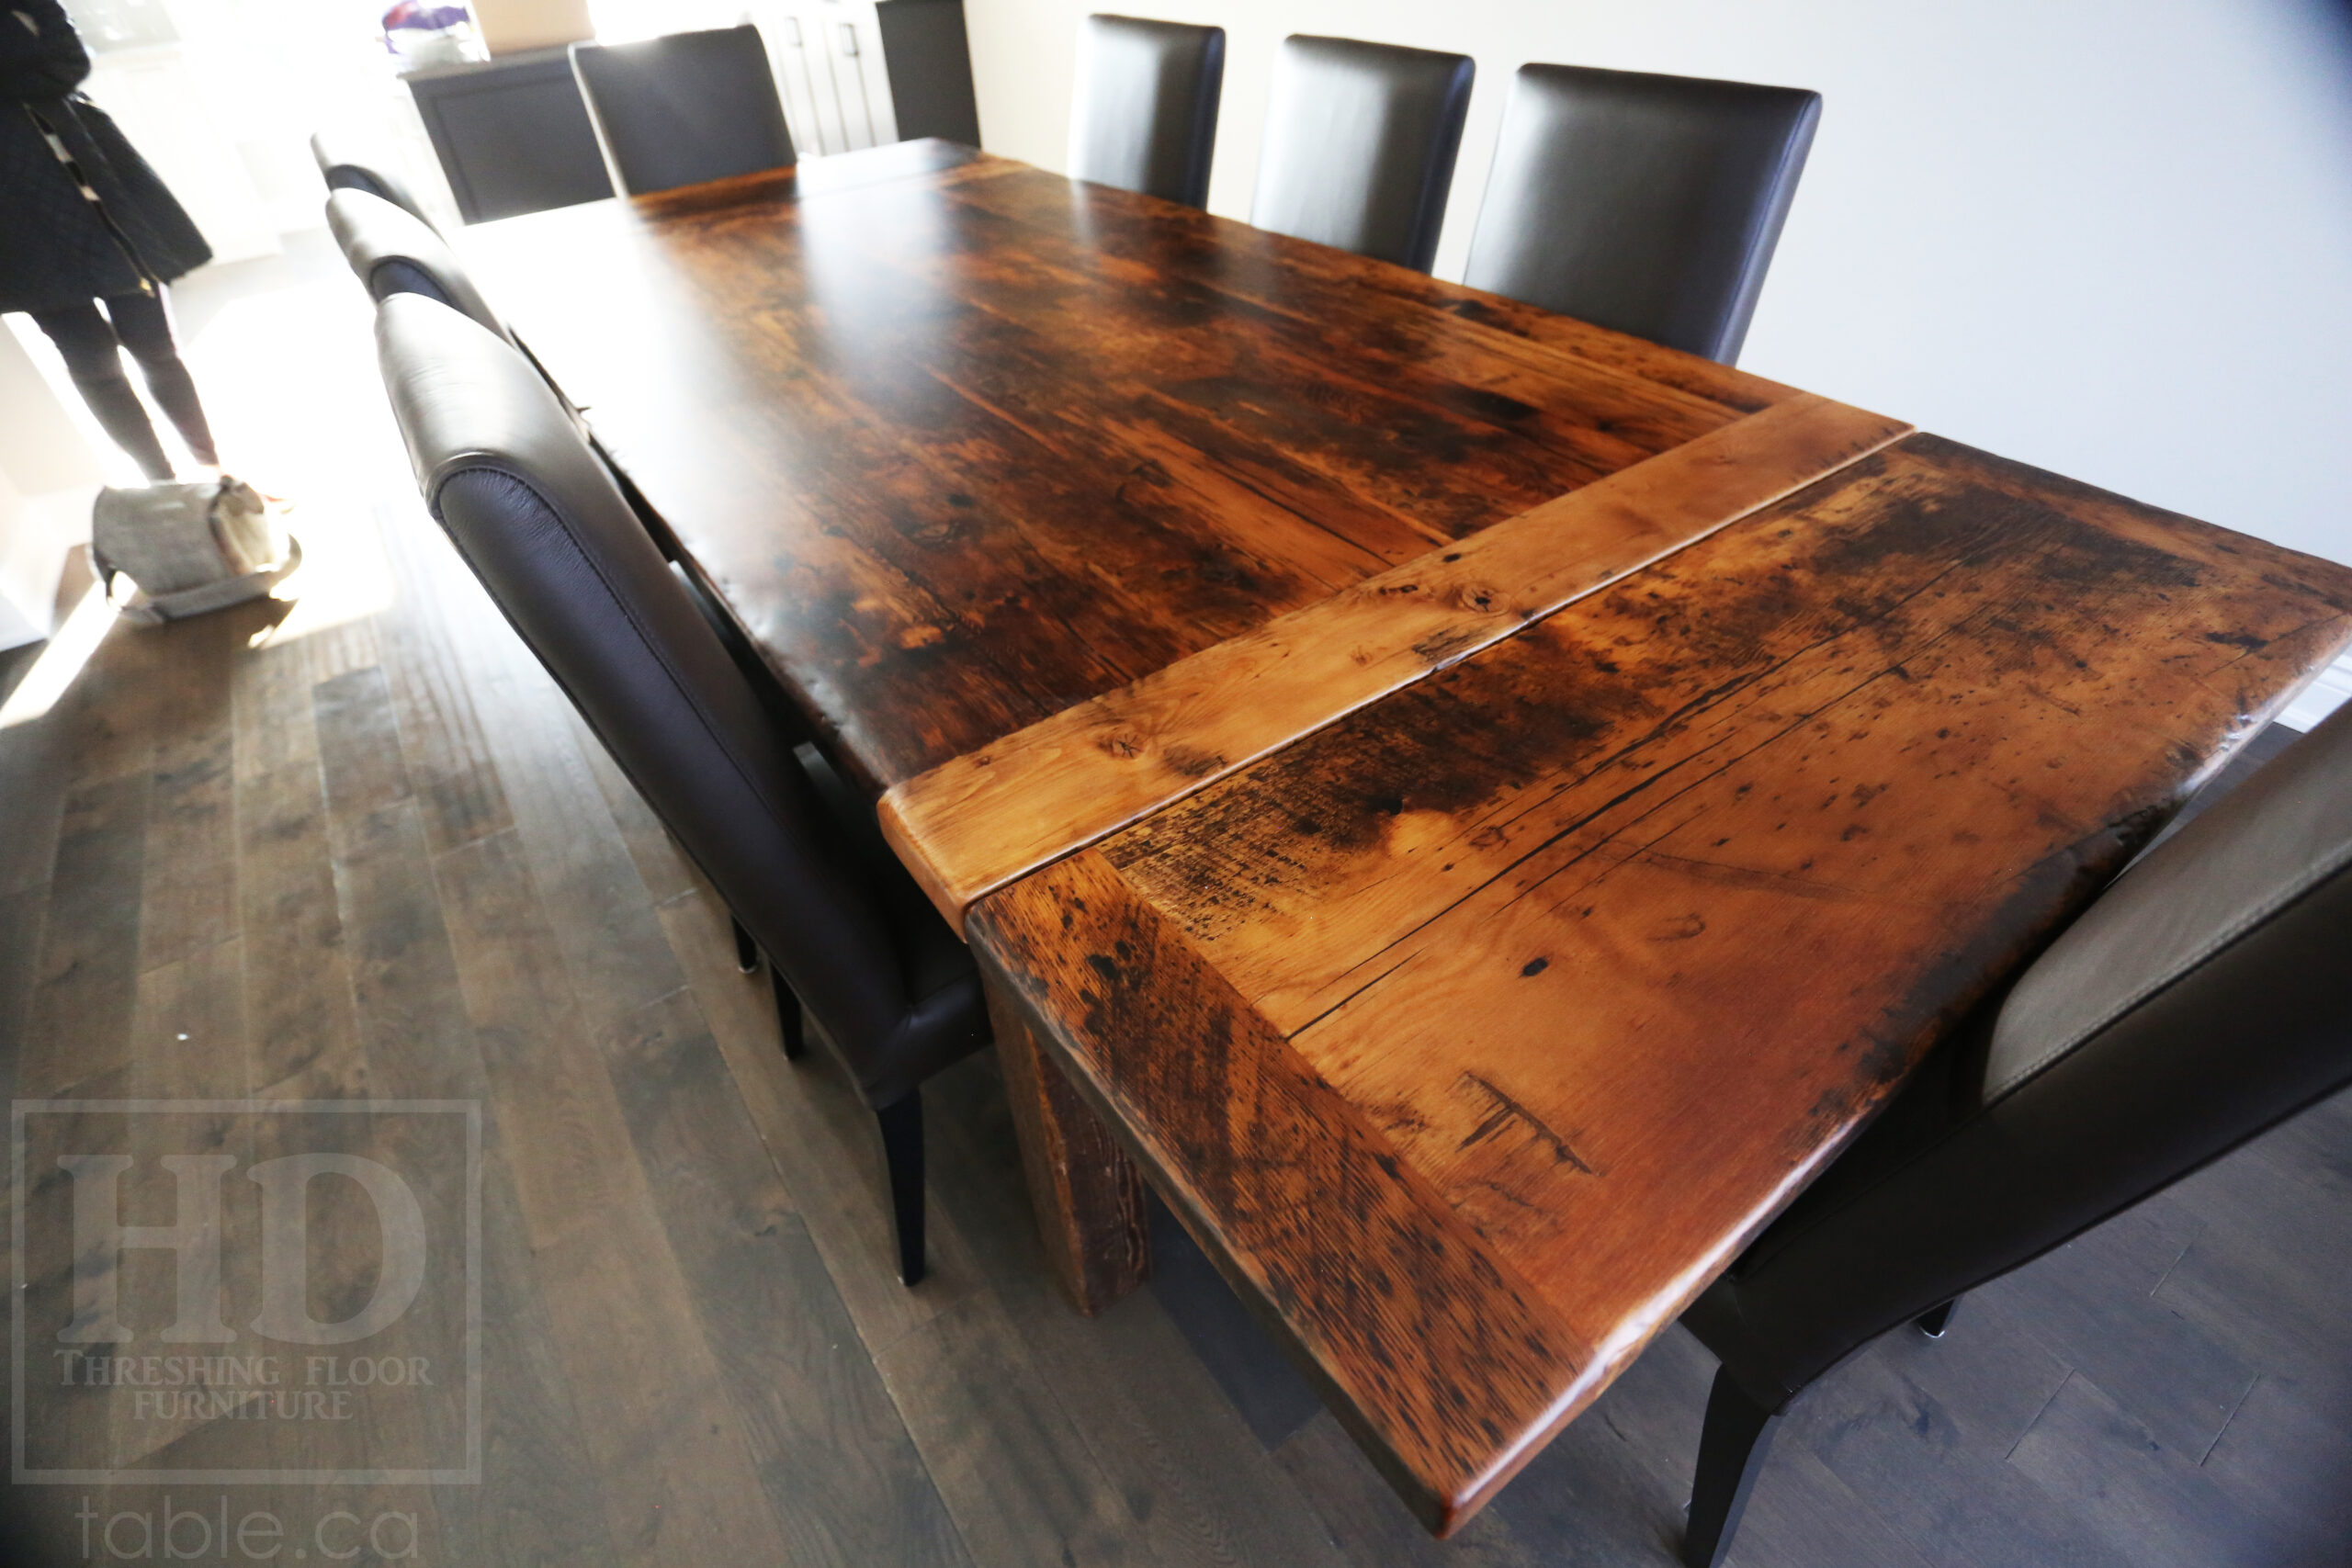 7’ Reclaimed Ontario Barnwood Table we made for a Milton, Ontario home – 48” wide – Harvest Base / Straight 4”x4” Windbrace Beam Legs - Old Growth Hemlock Threshing Floor Construction - Original edges & distressing maintained – Bread Edge Board Ends – Premium epoxy + matte polyurethane finish – Two 18” Leaf Extensions – 8 Topgrain Leather Parsons Chairs / Santiago Black - www.table.ca